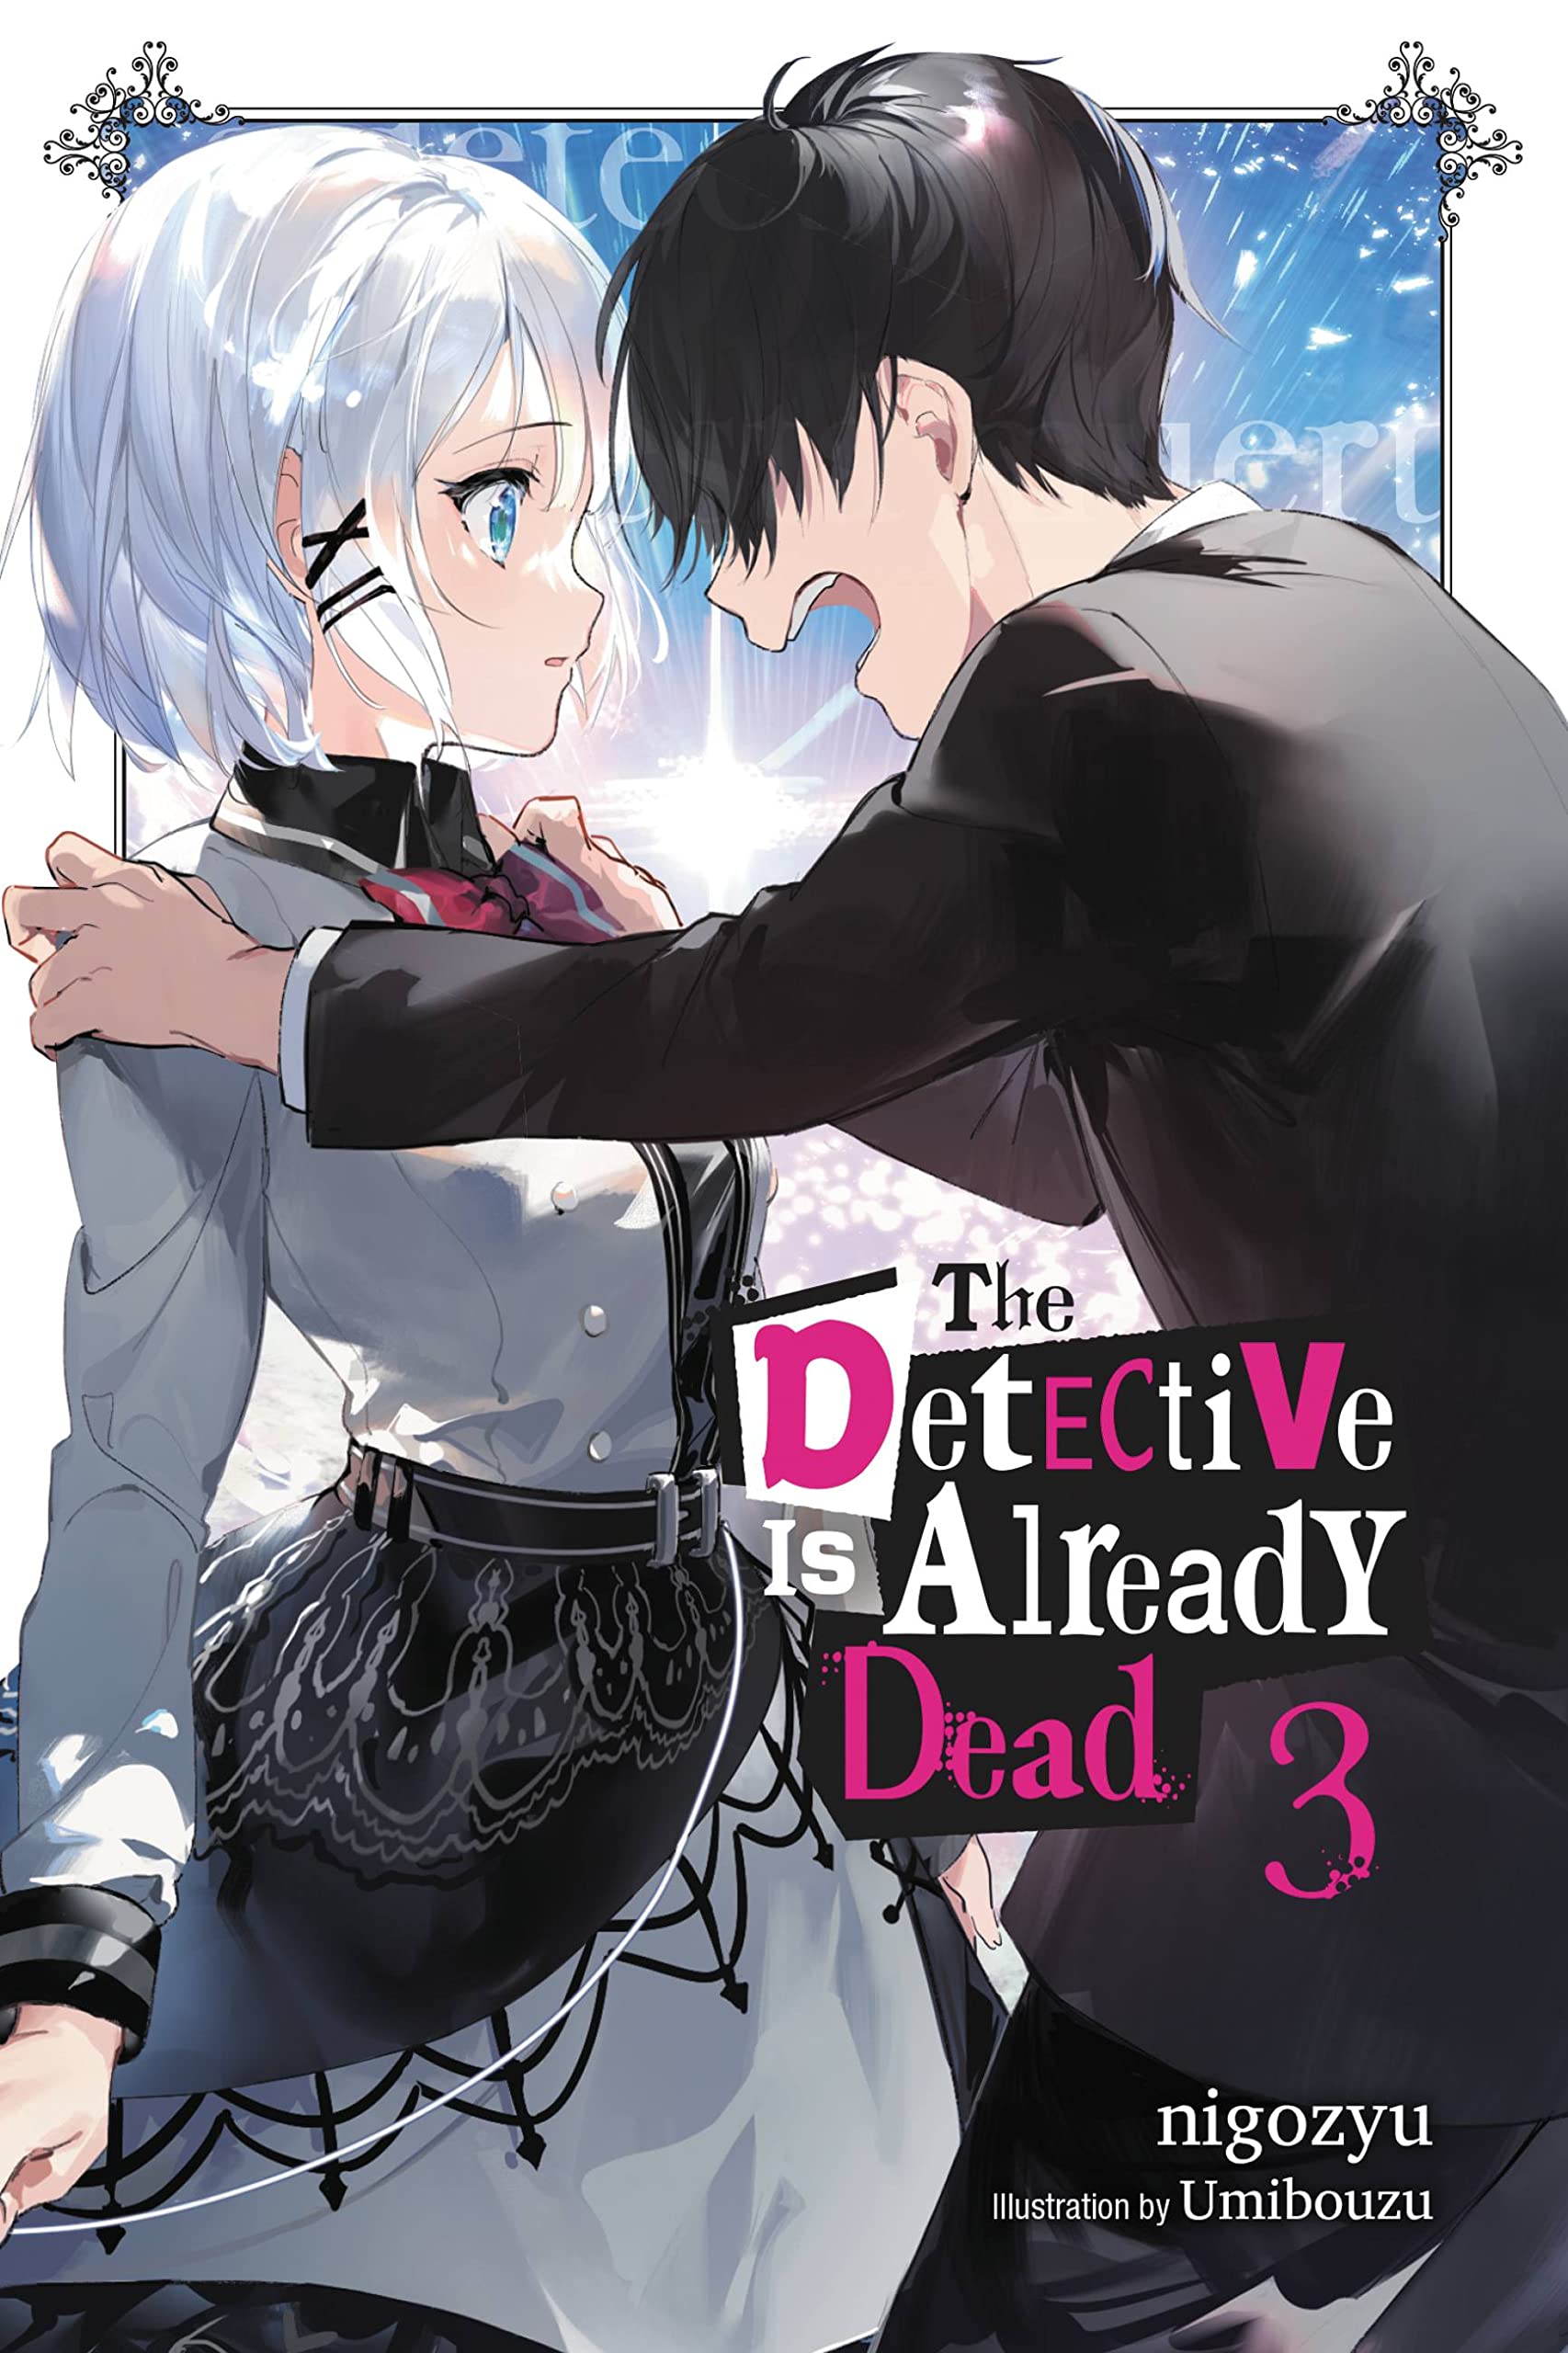 The Detective Is Already Dead Volume 3 Review - DarkSkyLady Reviews